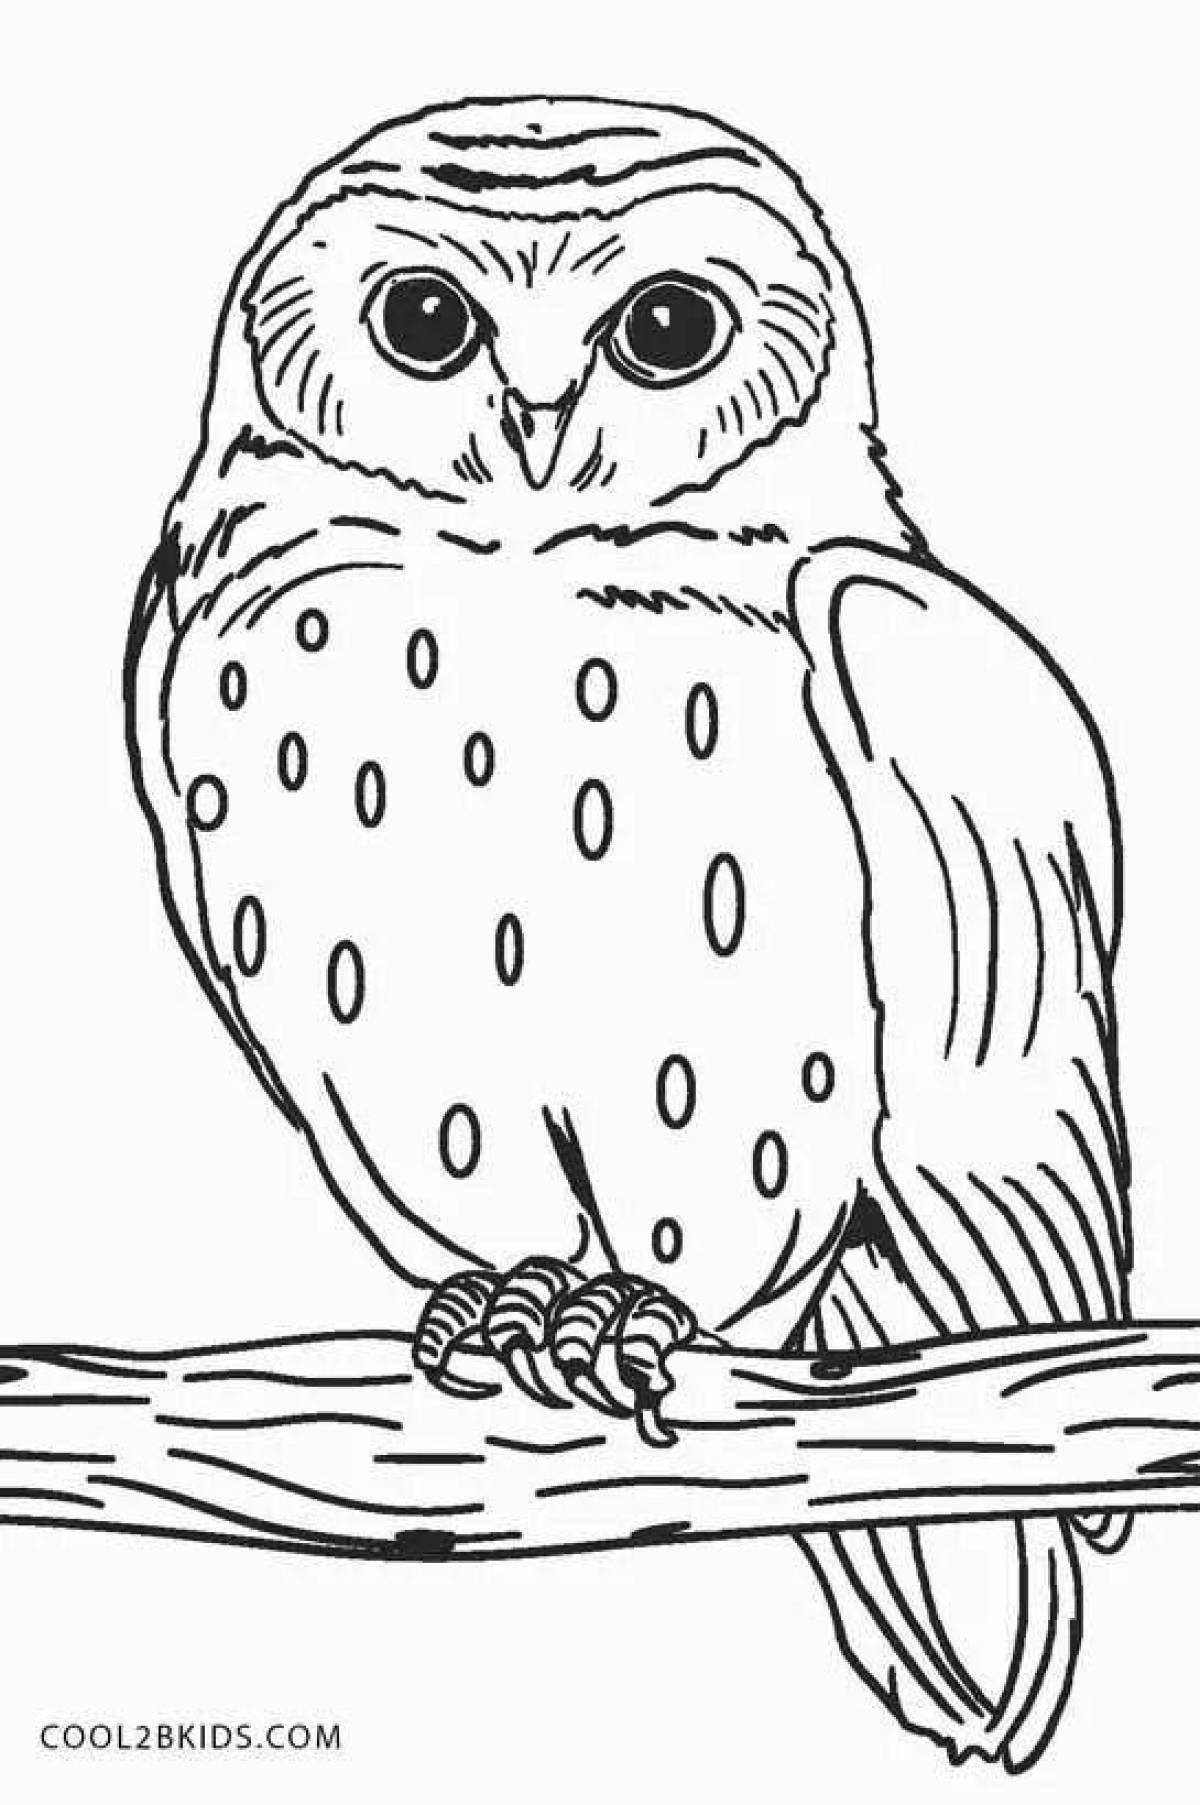 Coloring book of a dazzling white owl